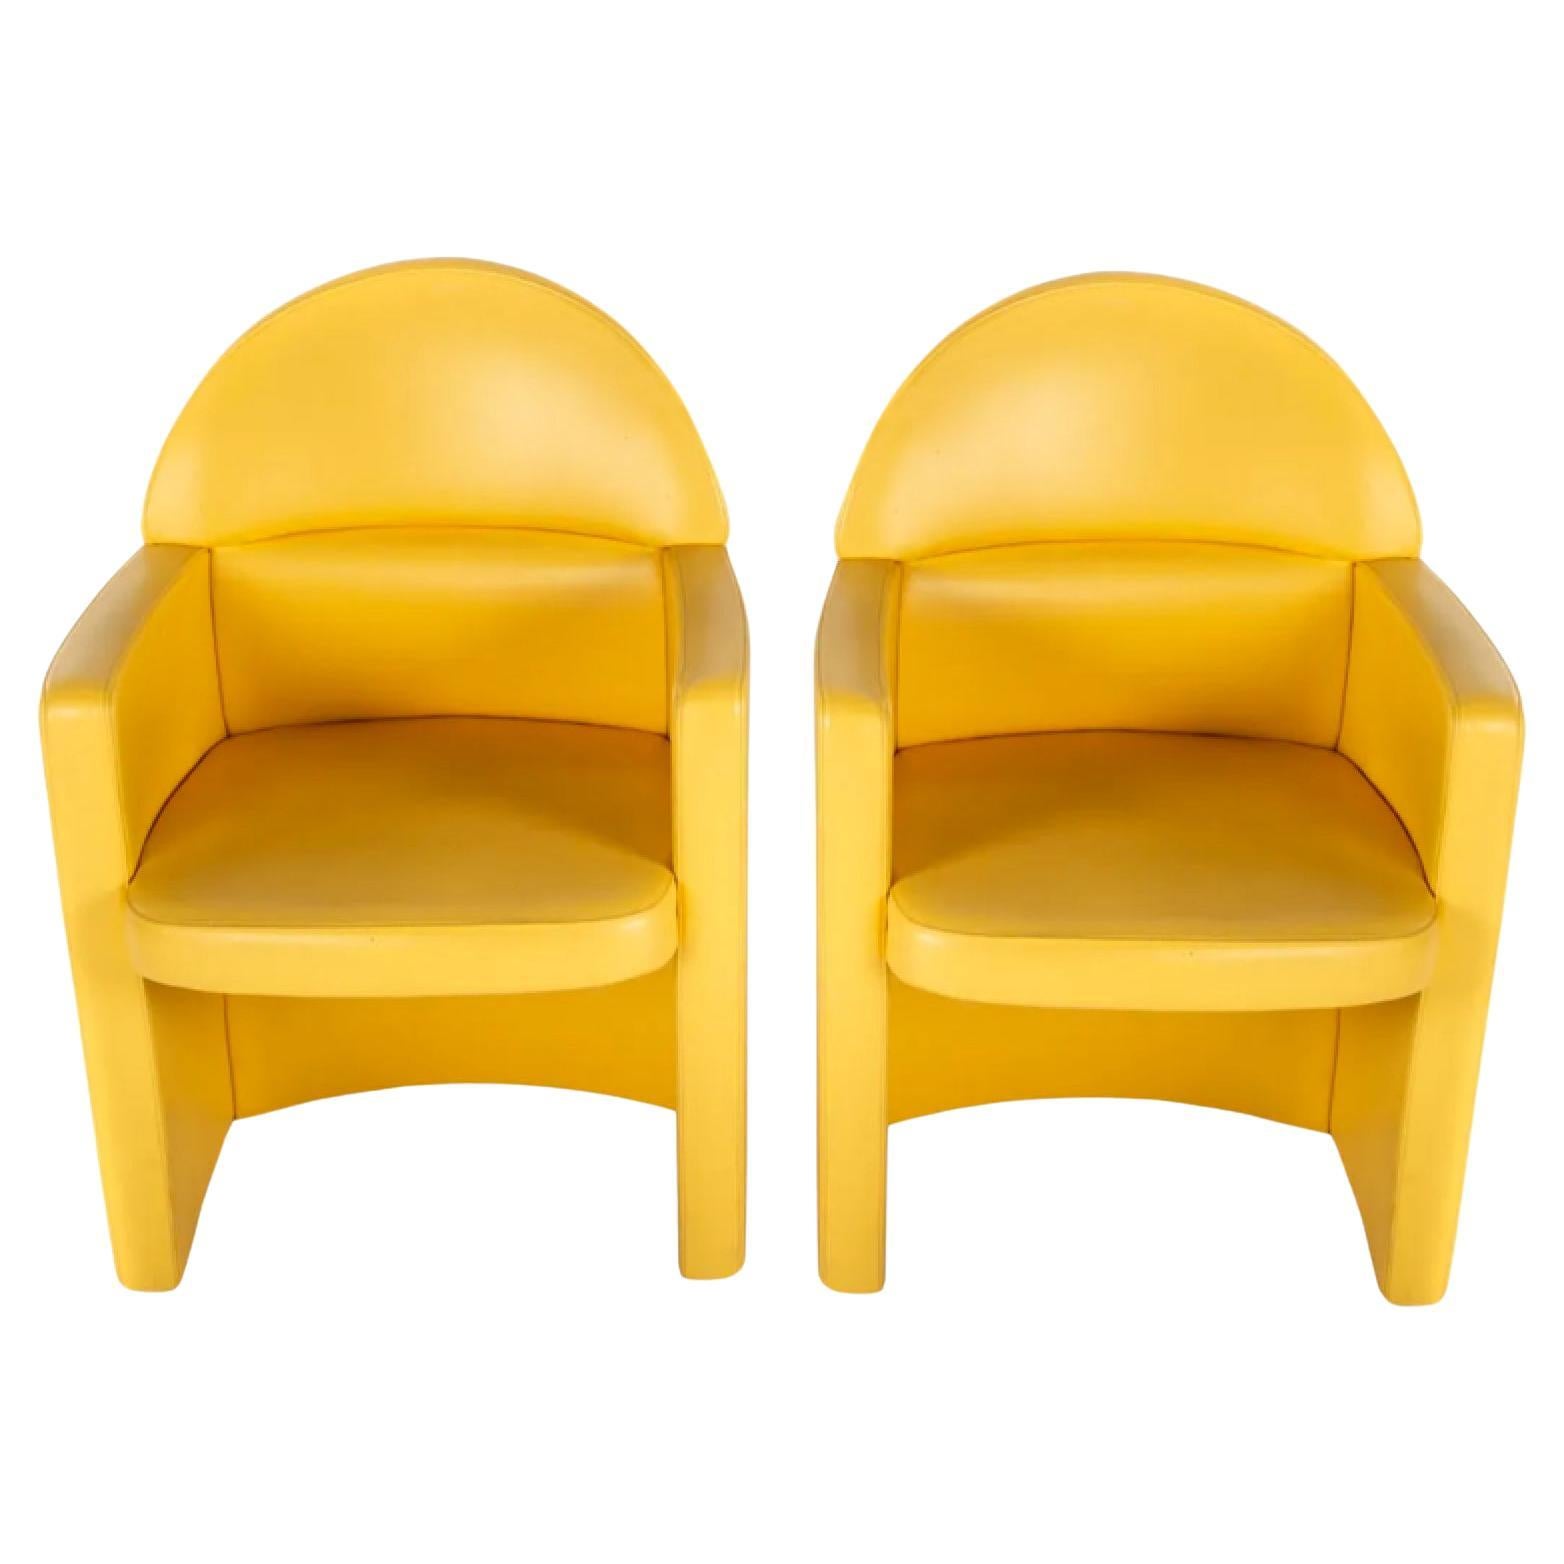 Pair of EGO Meeting chairs in Bright Yellow Leather by Poltrona Frau Italy For Sale